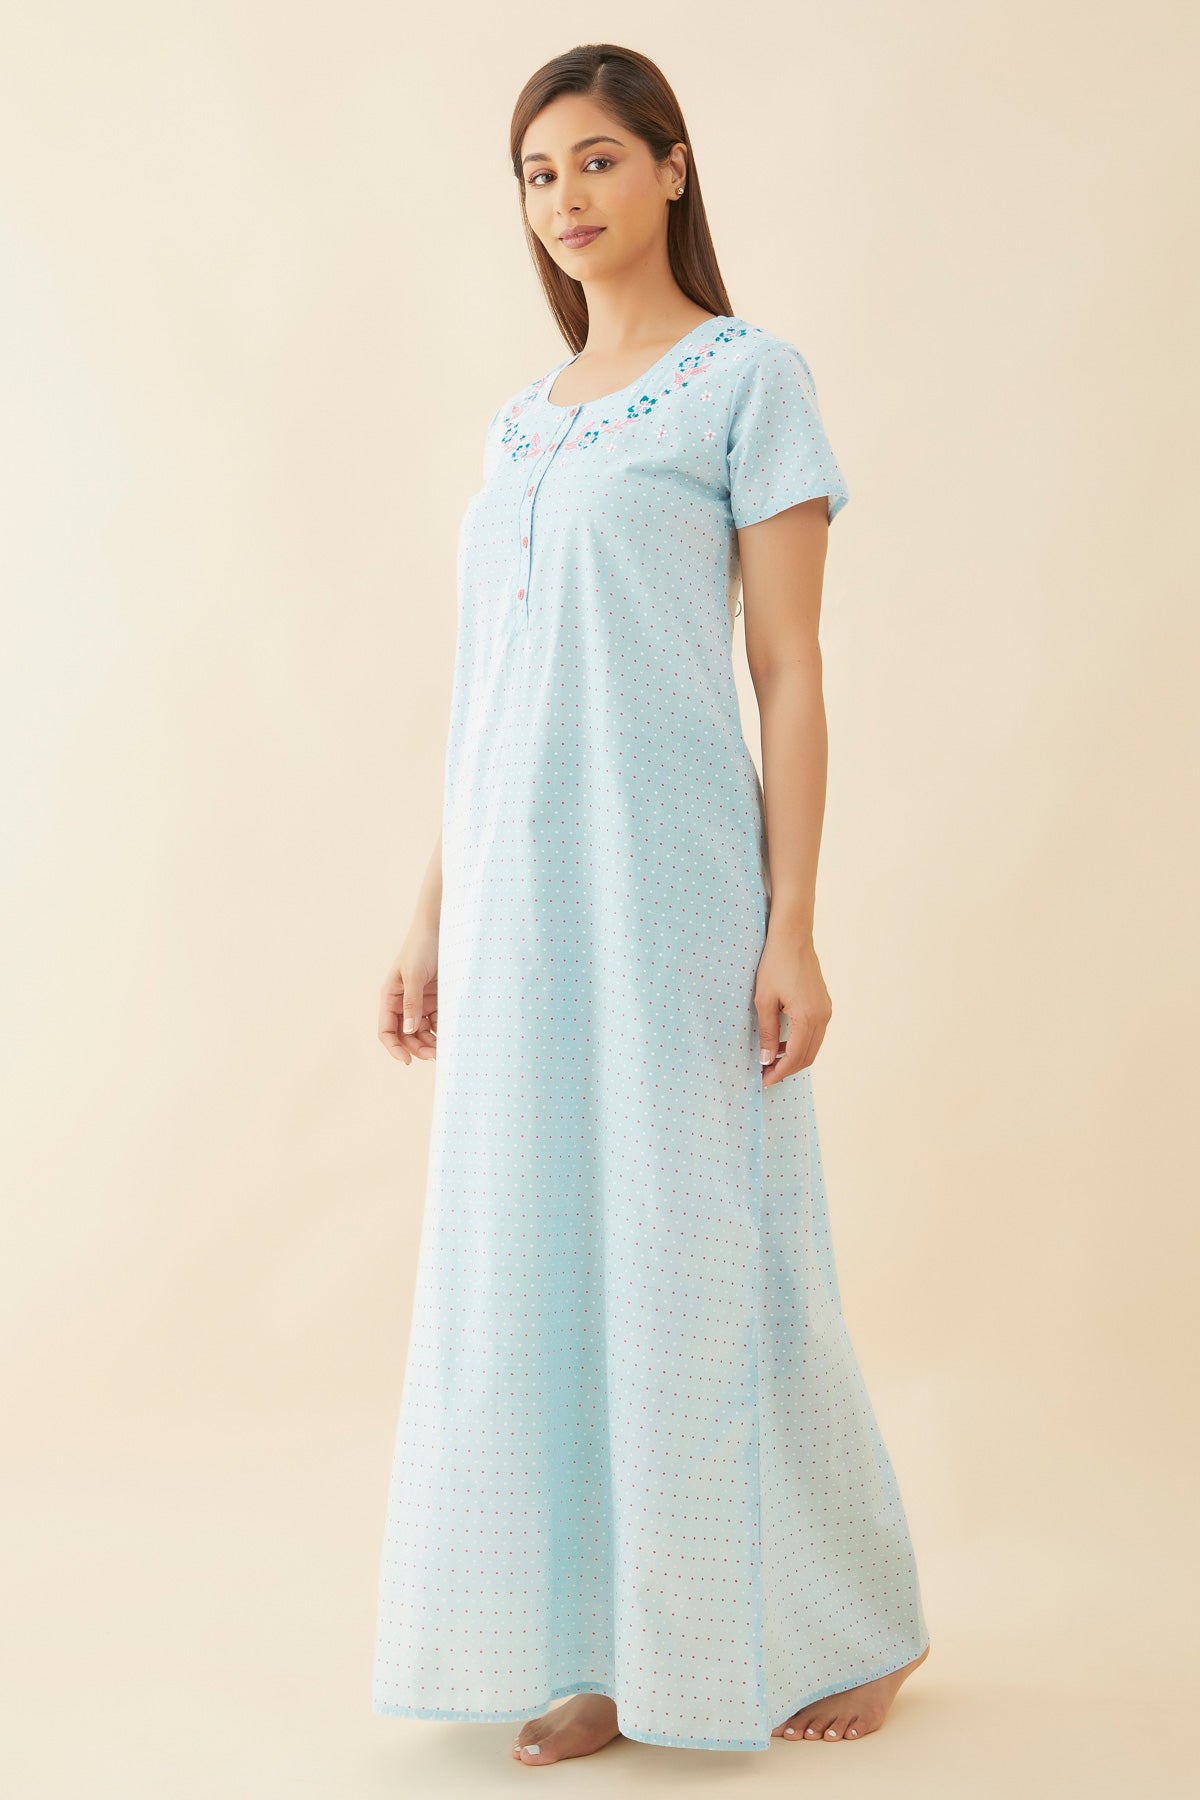 All Over Polka Dot With Contrast Floral Embroidered Yoke Nighty - Blue